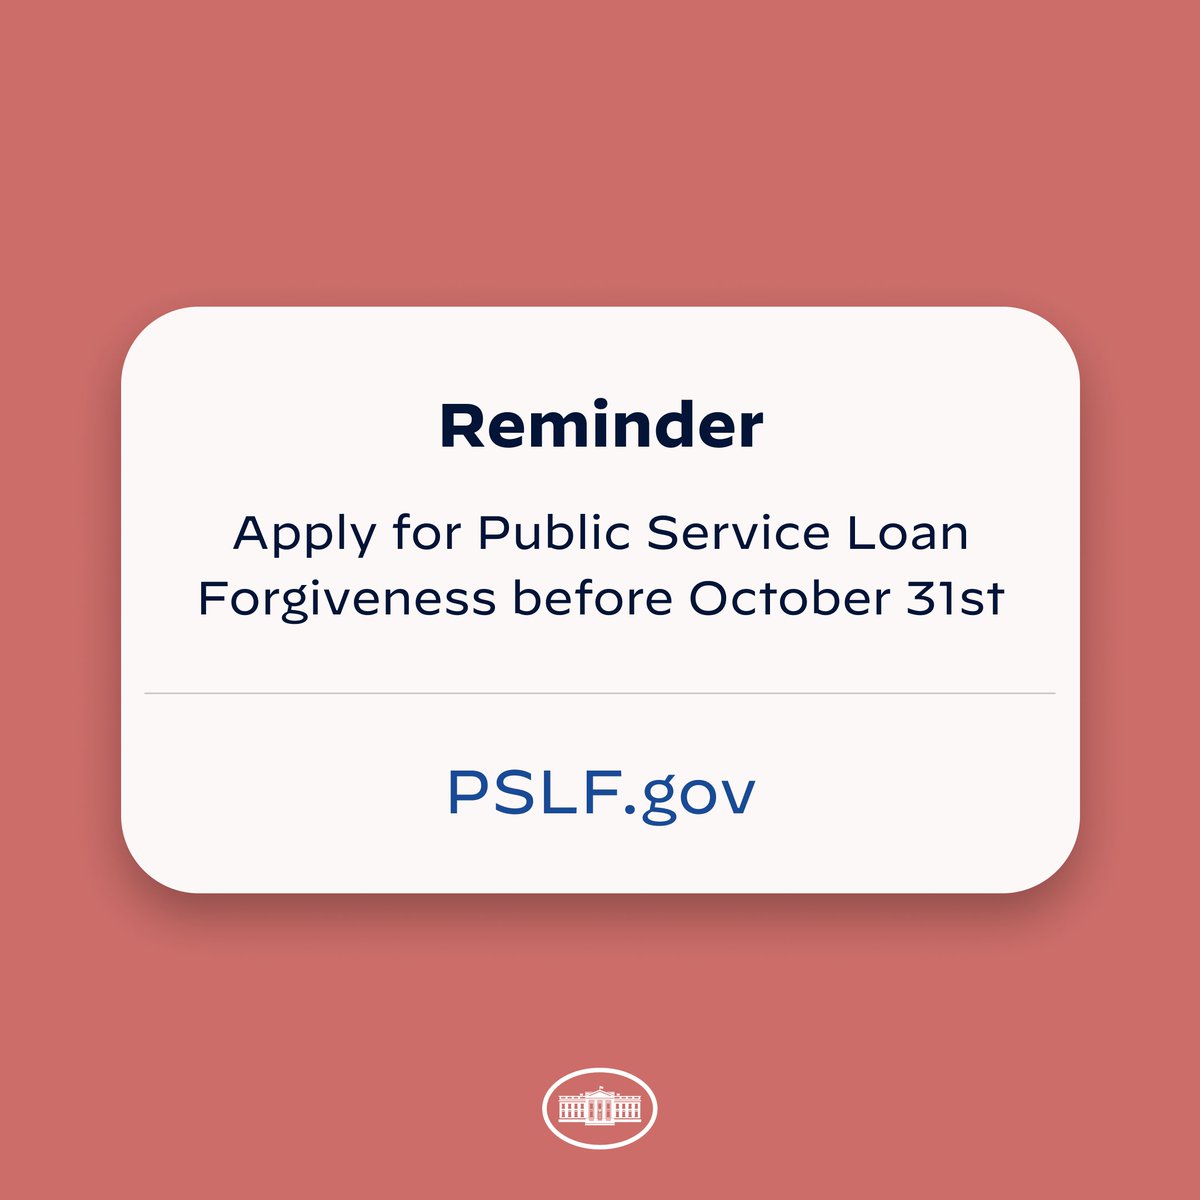 There’s just two days left to apply for student loan forgiveness under temporary changes to the Public Service Loan Forgiveness Program. Here’s all you need to do to hit the deadline: